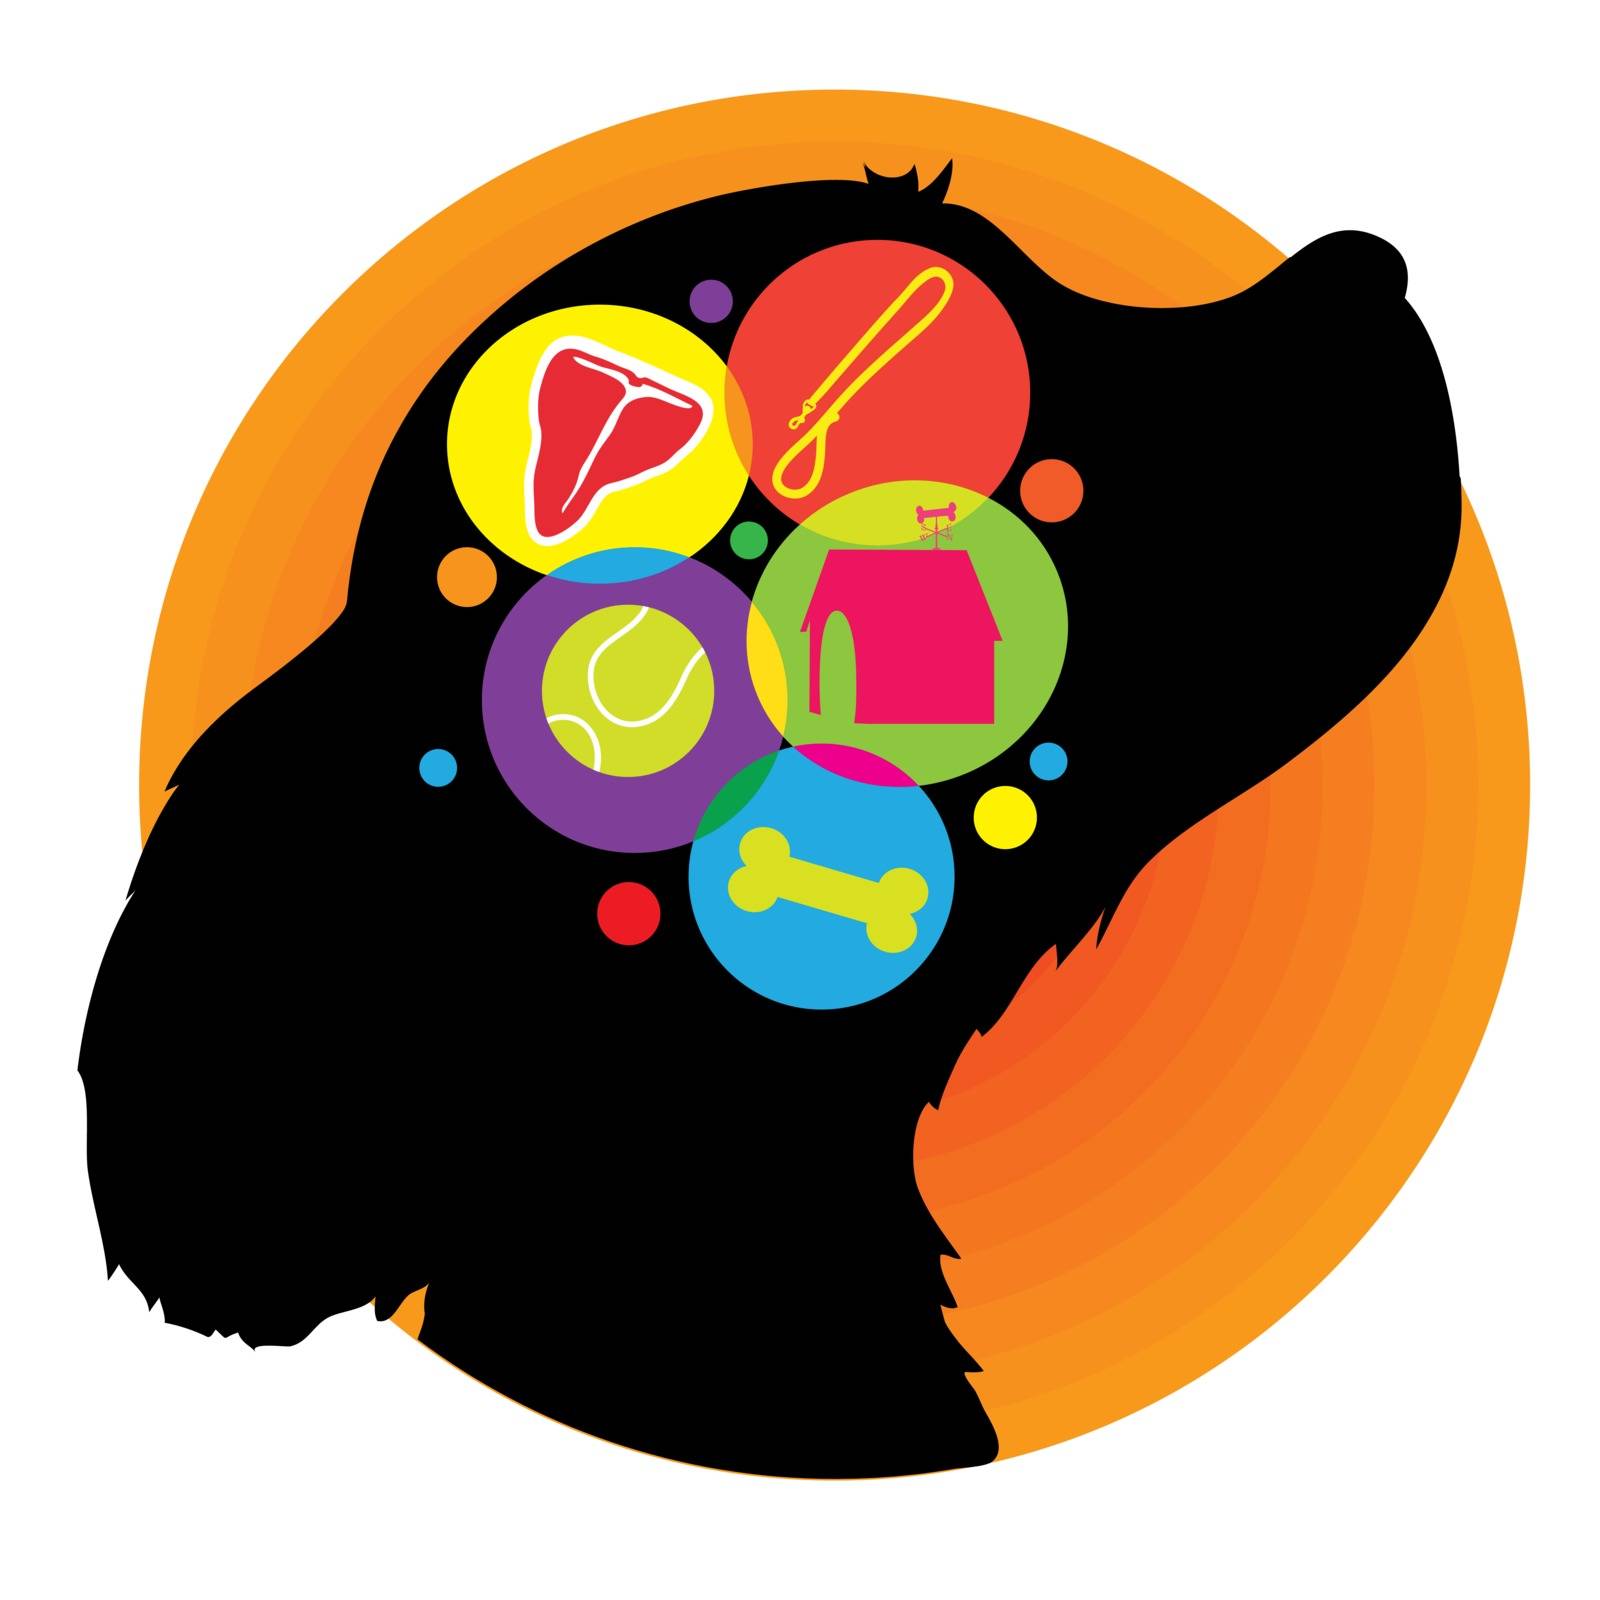 A silhouette of a dogs head with icons representing the things he may be thinking about, food, home,playing and treats